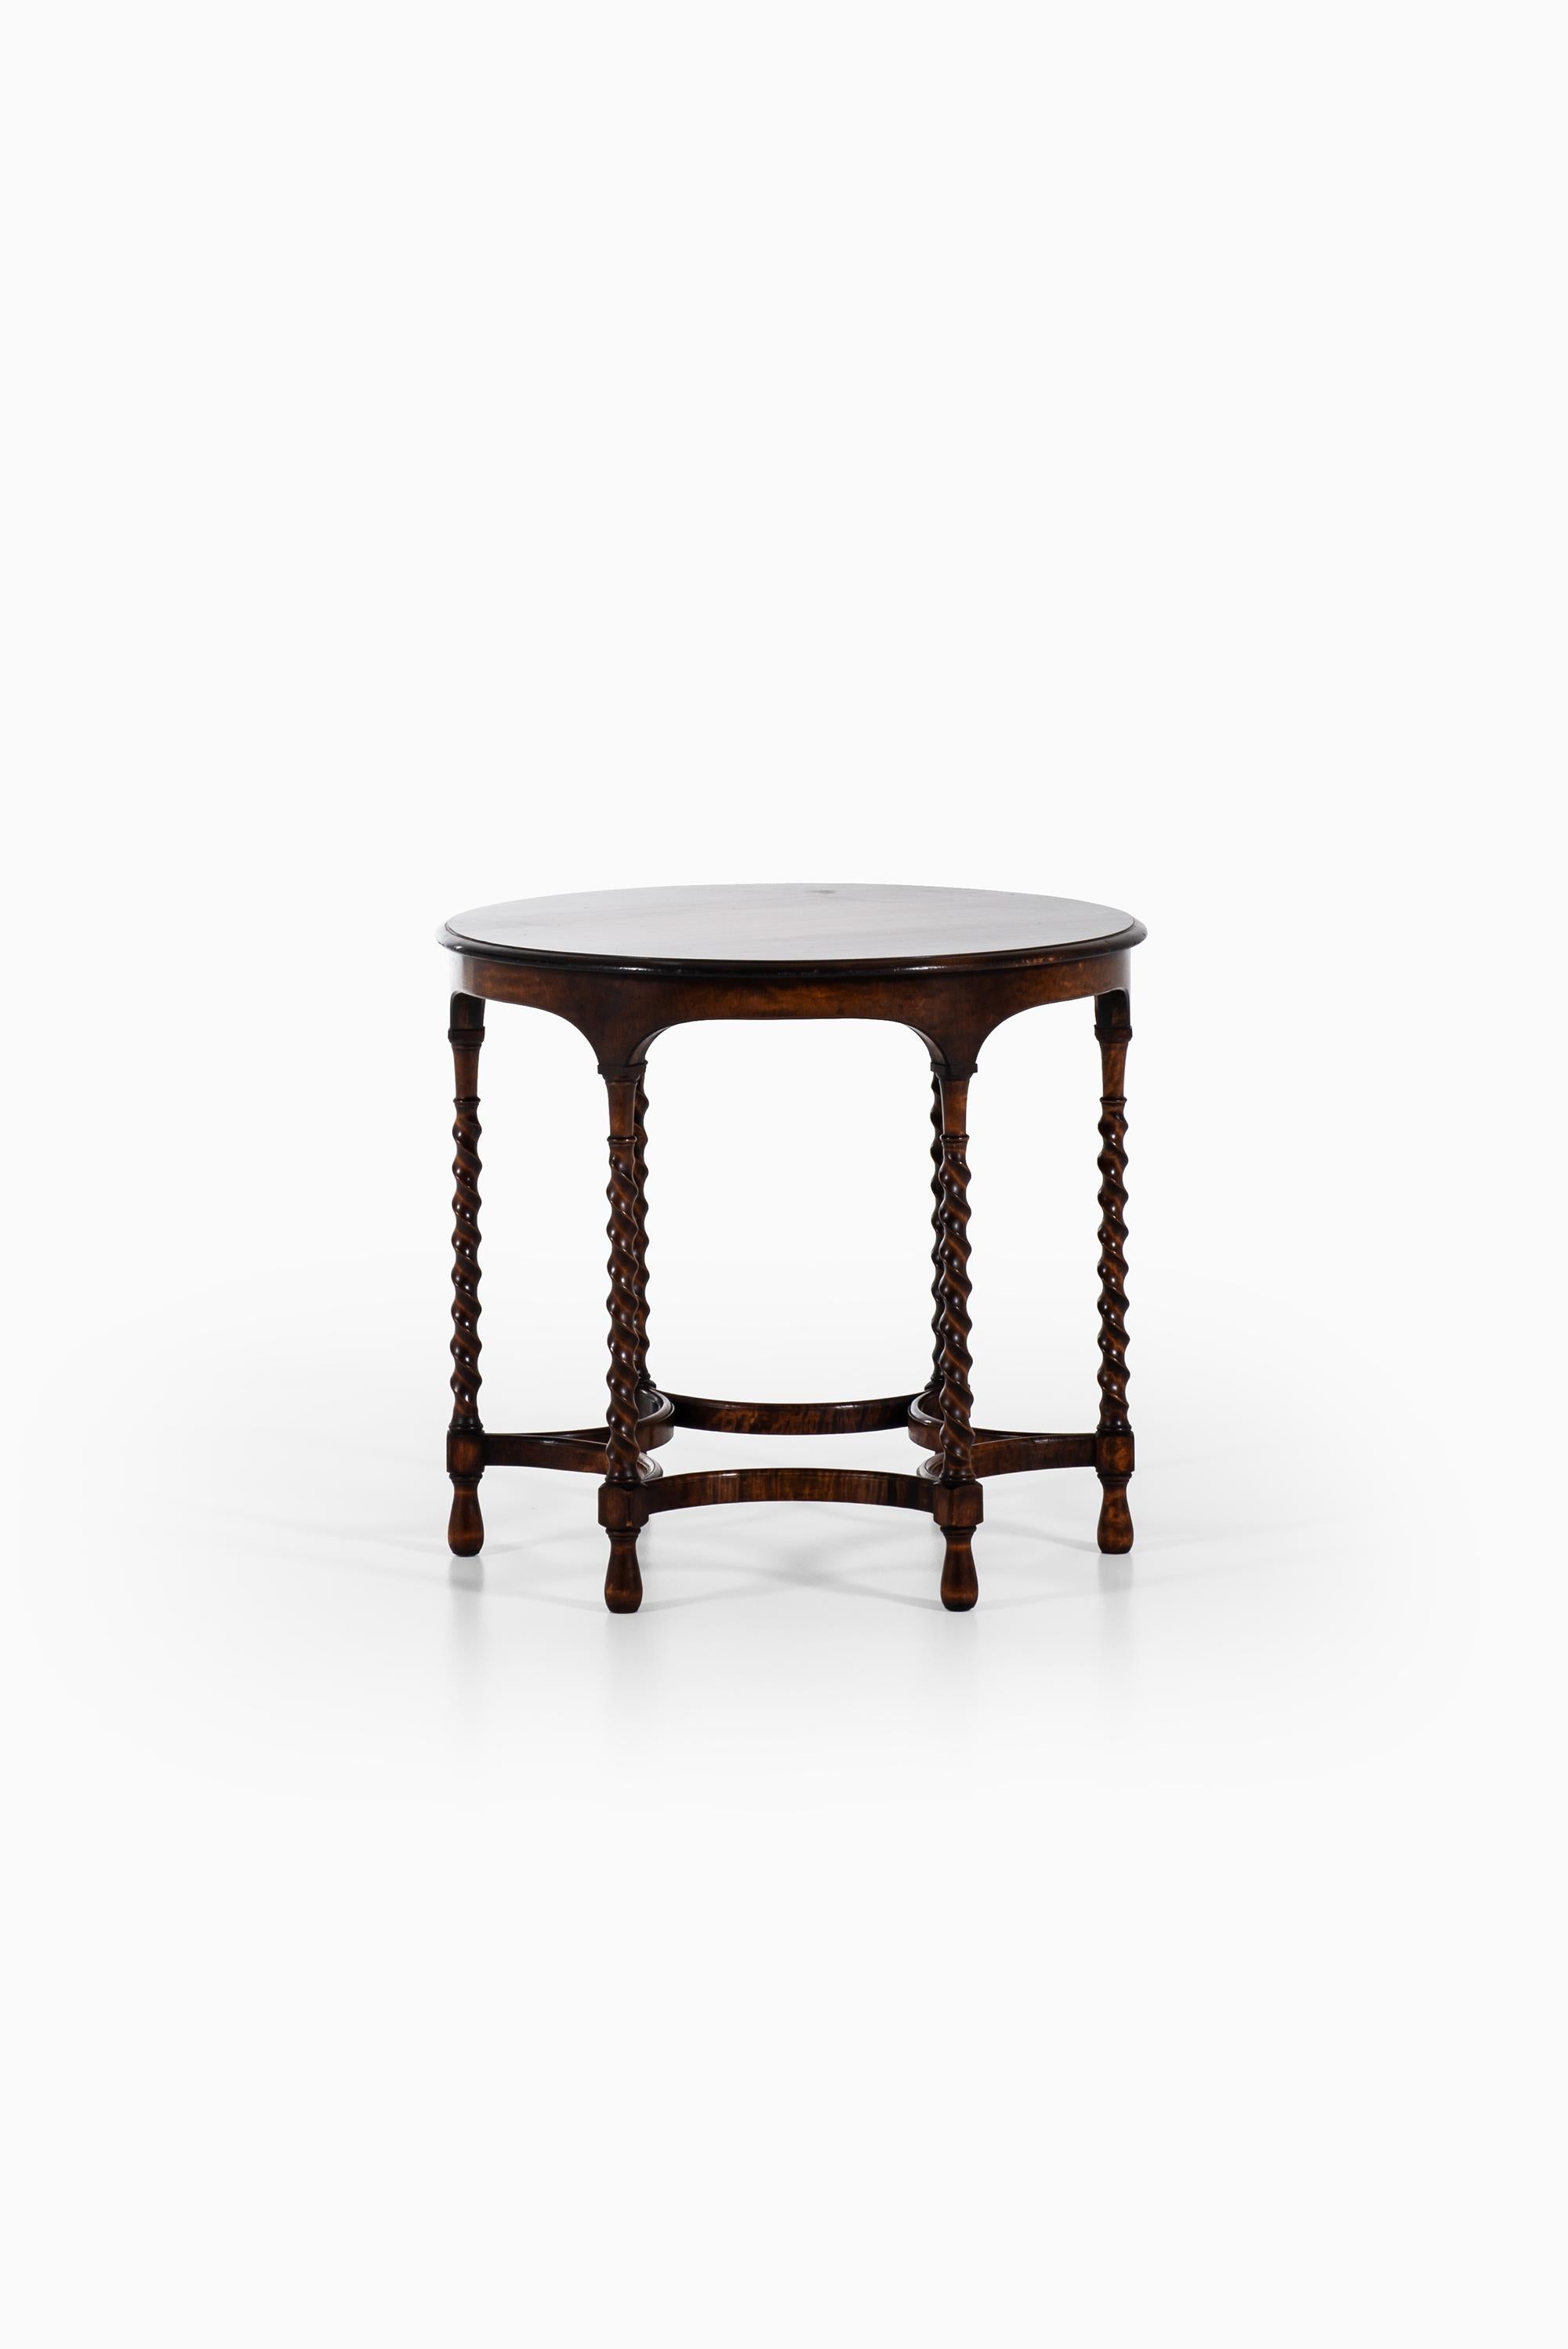 Swedish Center Table in Dark Stained Beech in the Manner of Axel Einar Hjorth